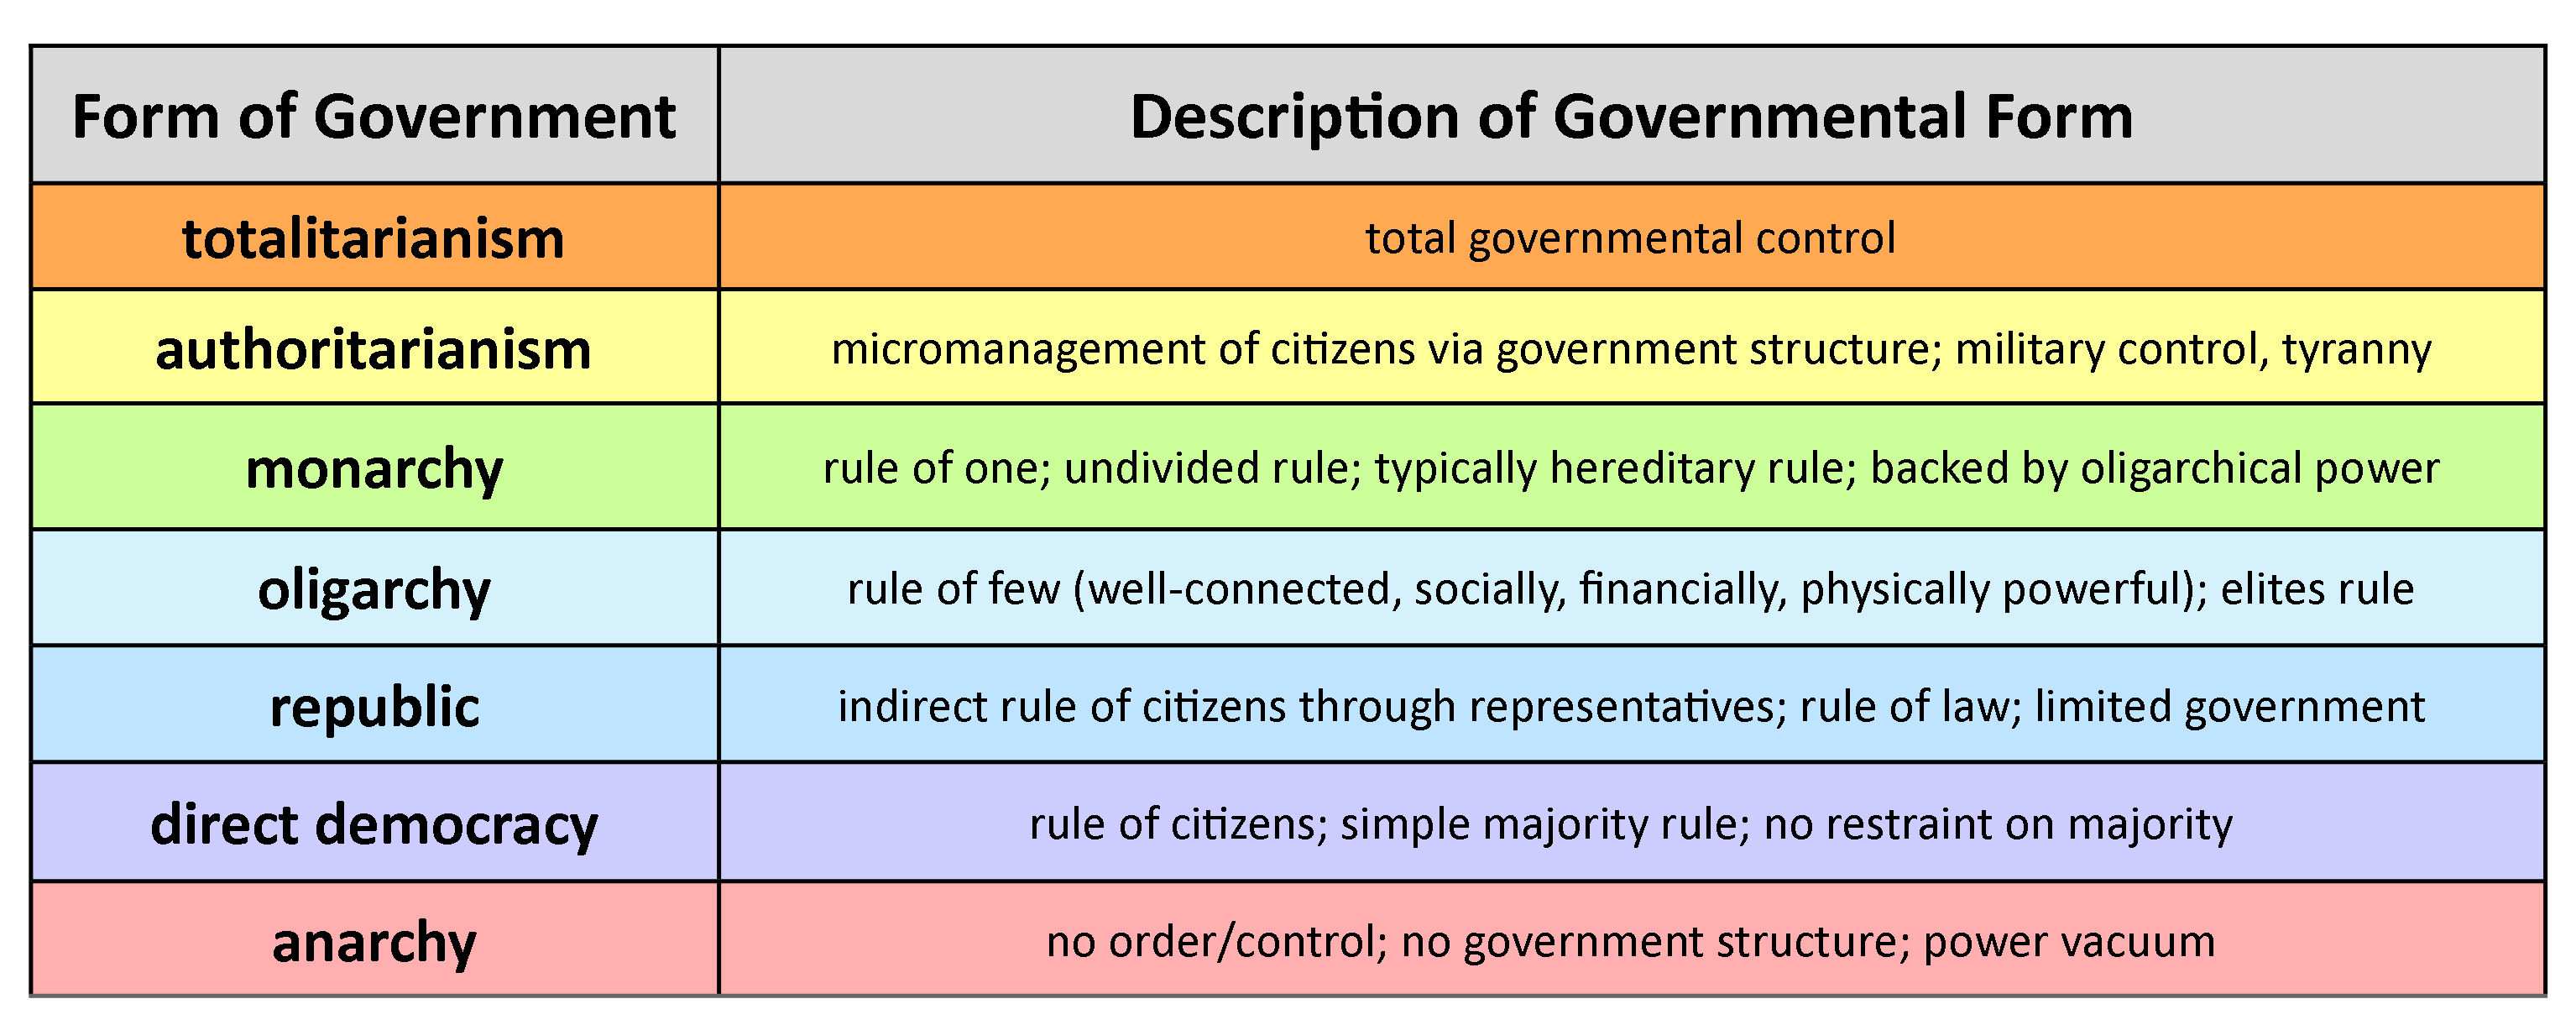 Chart of governmental forms including totalitarianism, authoritarianism, monarchy, oligarchy, republic, direct democracy, and anarchy.